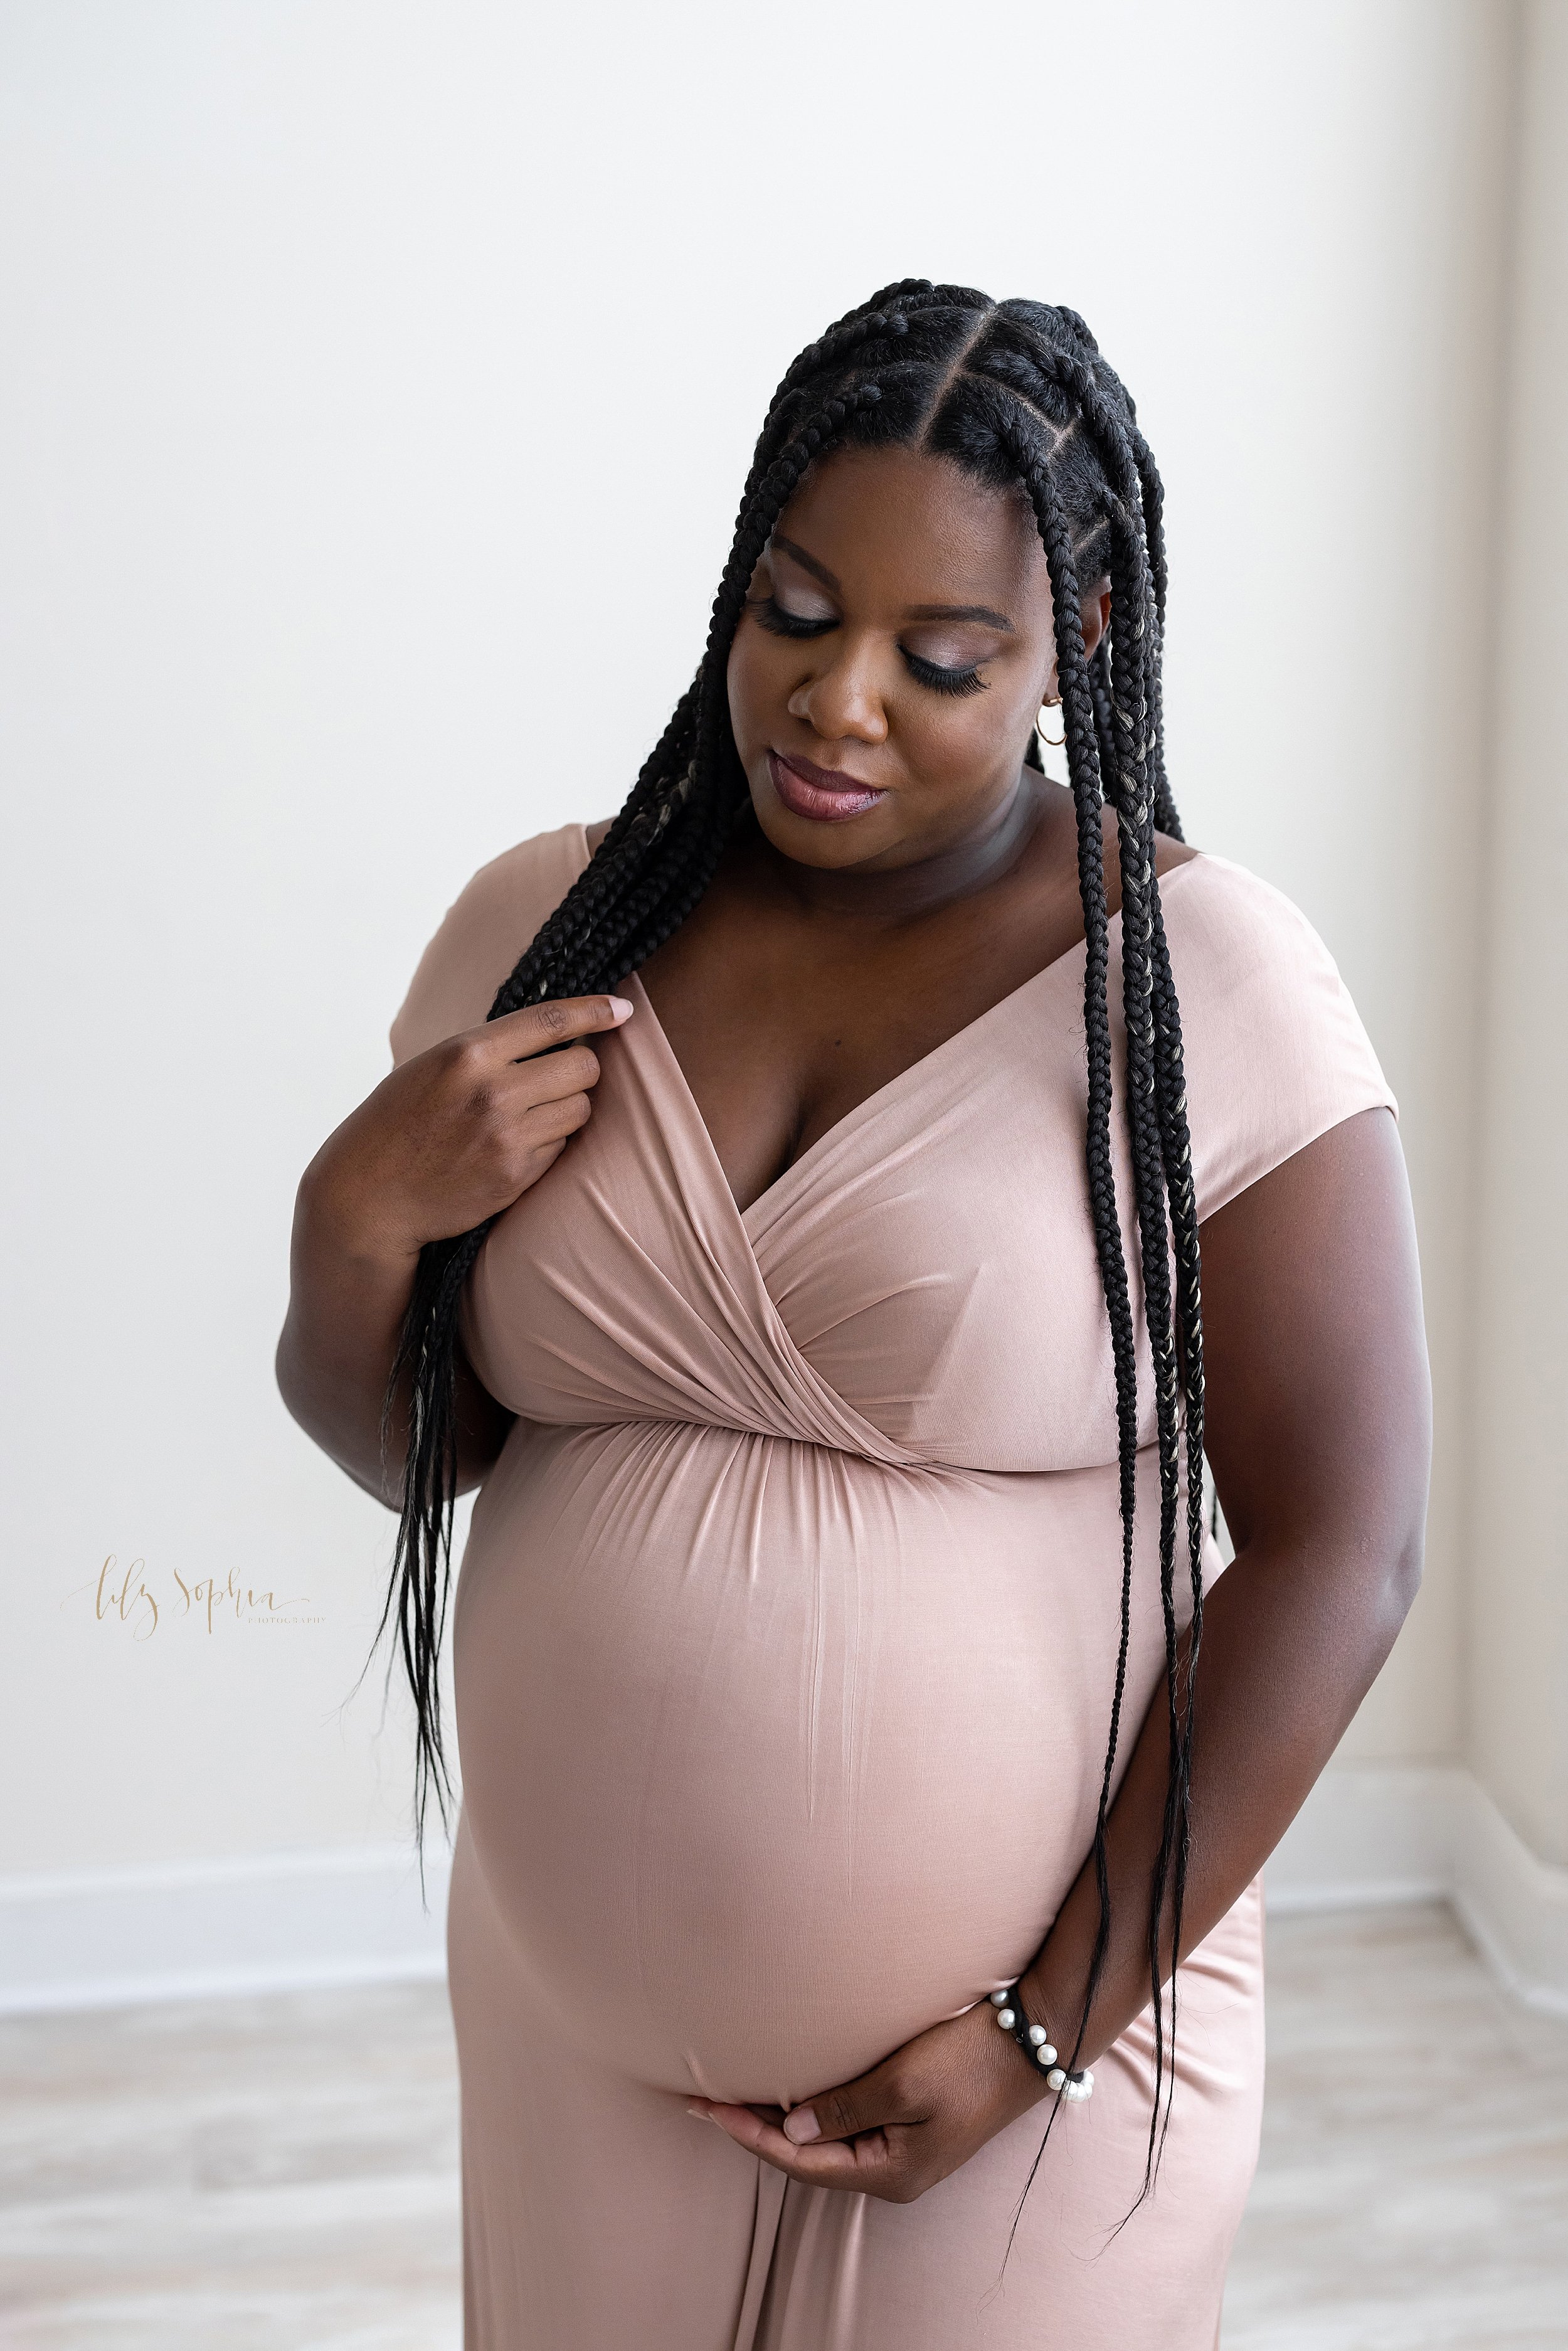  Maternity photoshoot of a black expectant mother as she stands in a studio with her right hand stroking her braids and her left hand holding the base of her belly as she contemplates the wonder of the life growing inside her taken in natural light i